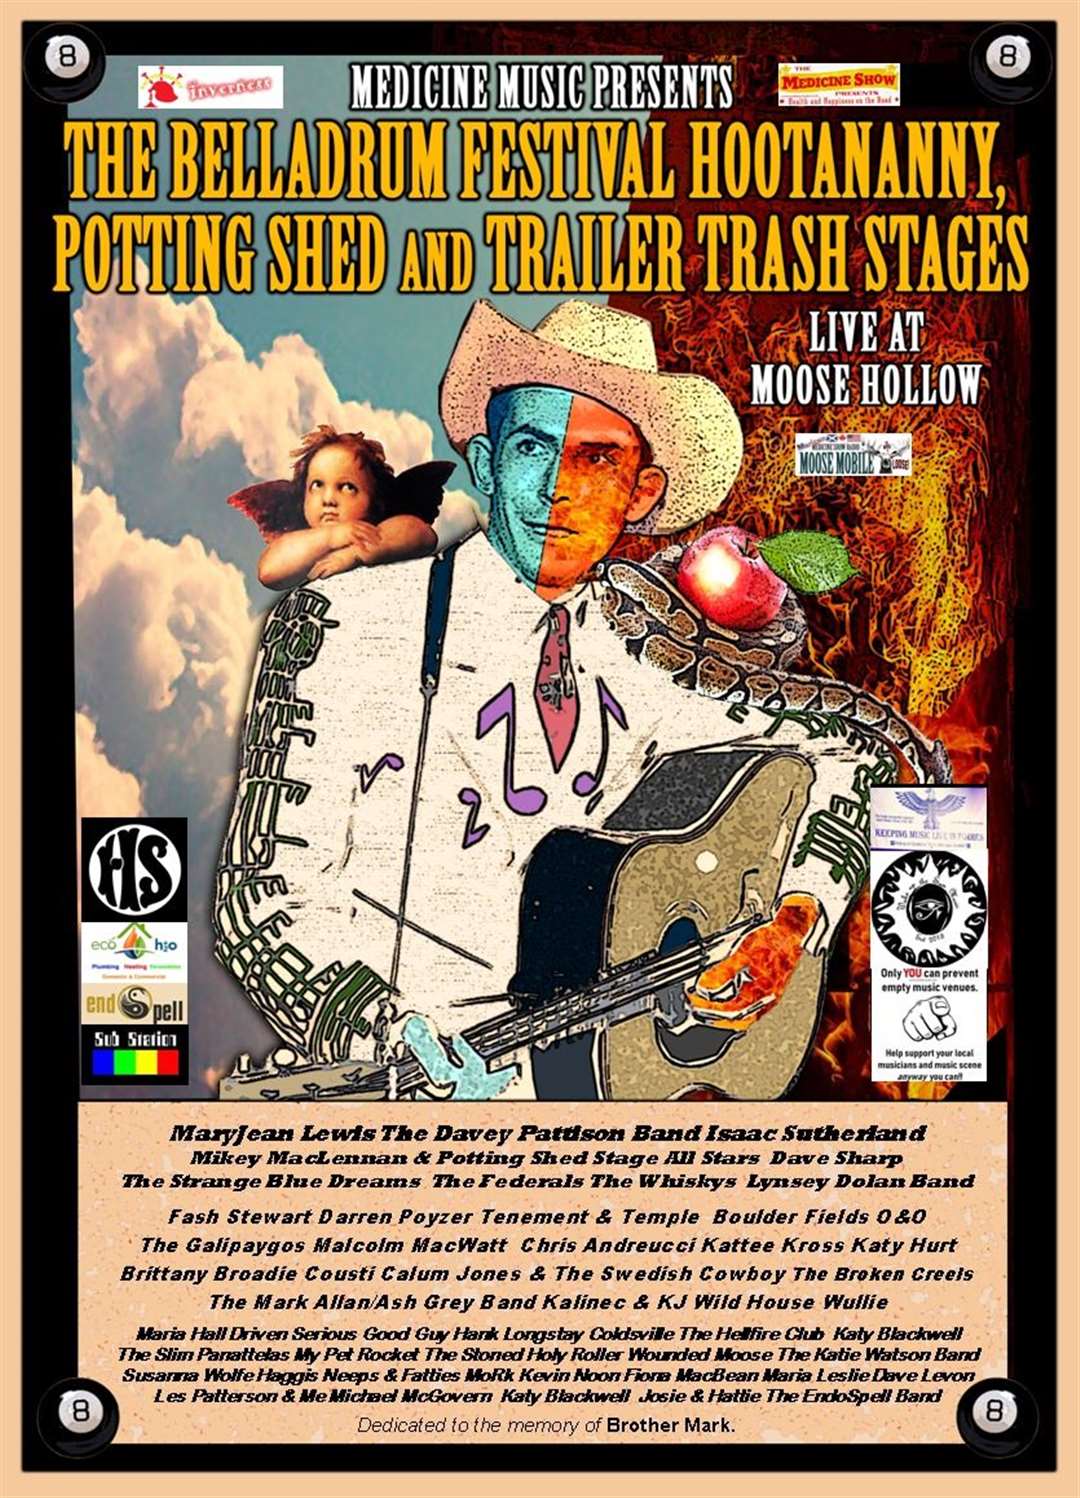 The line-up for the Potting shed and Trailer Trash Stage.